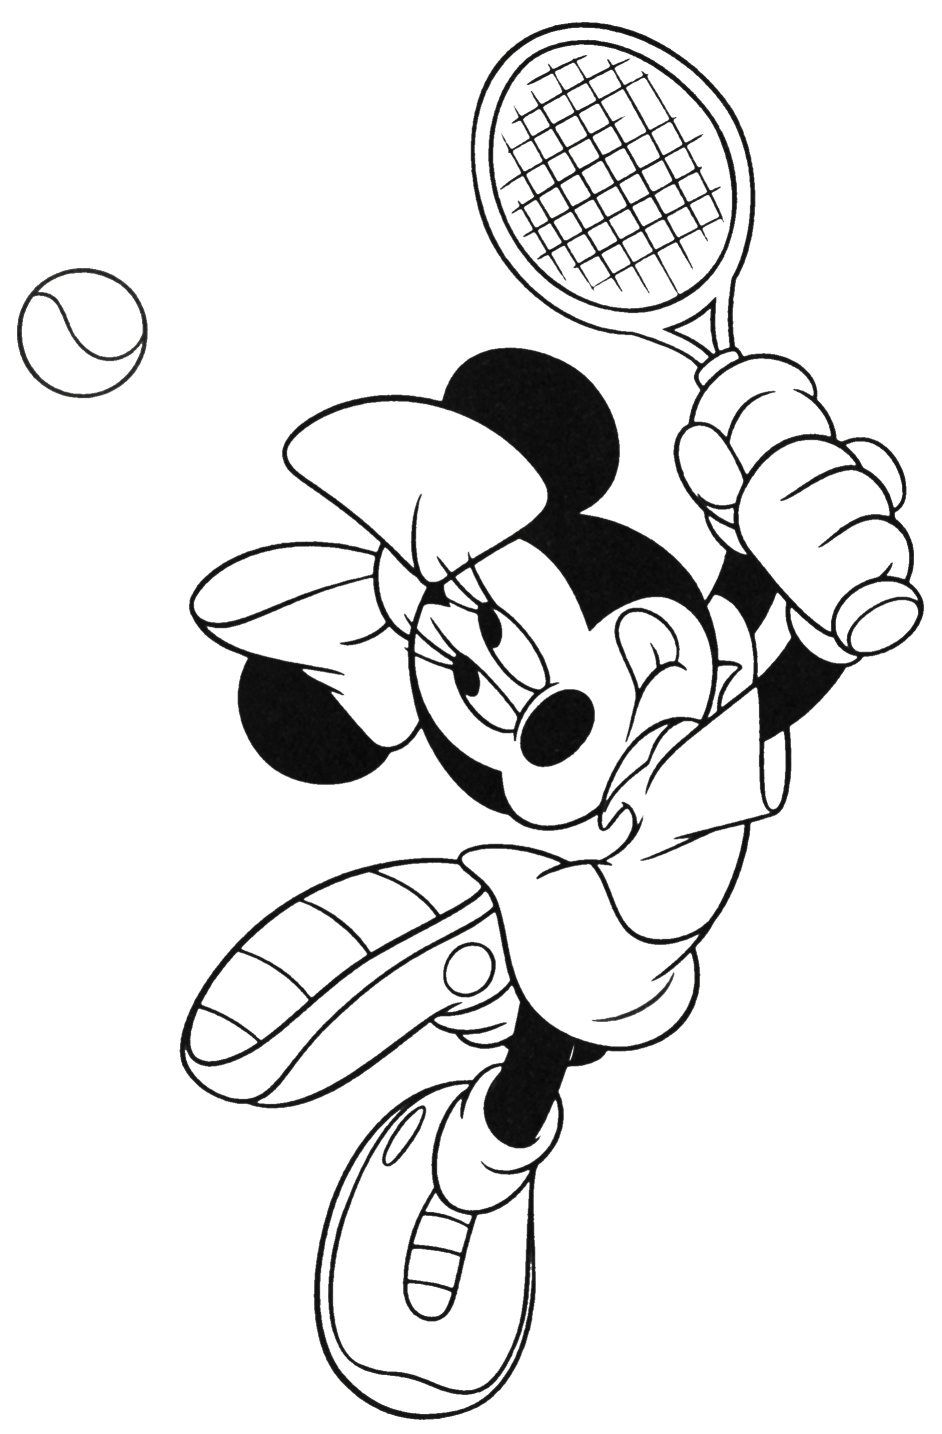 Minnie Mouse Playing Tennis S72de Coloring Page